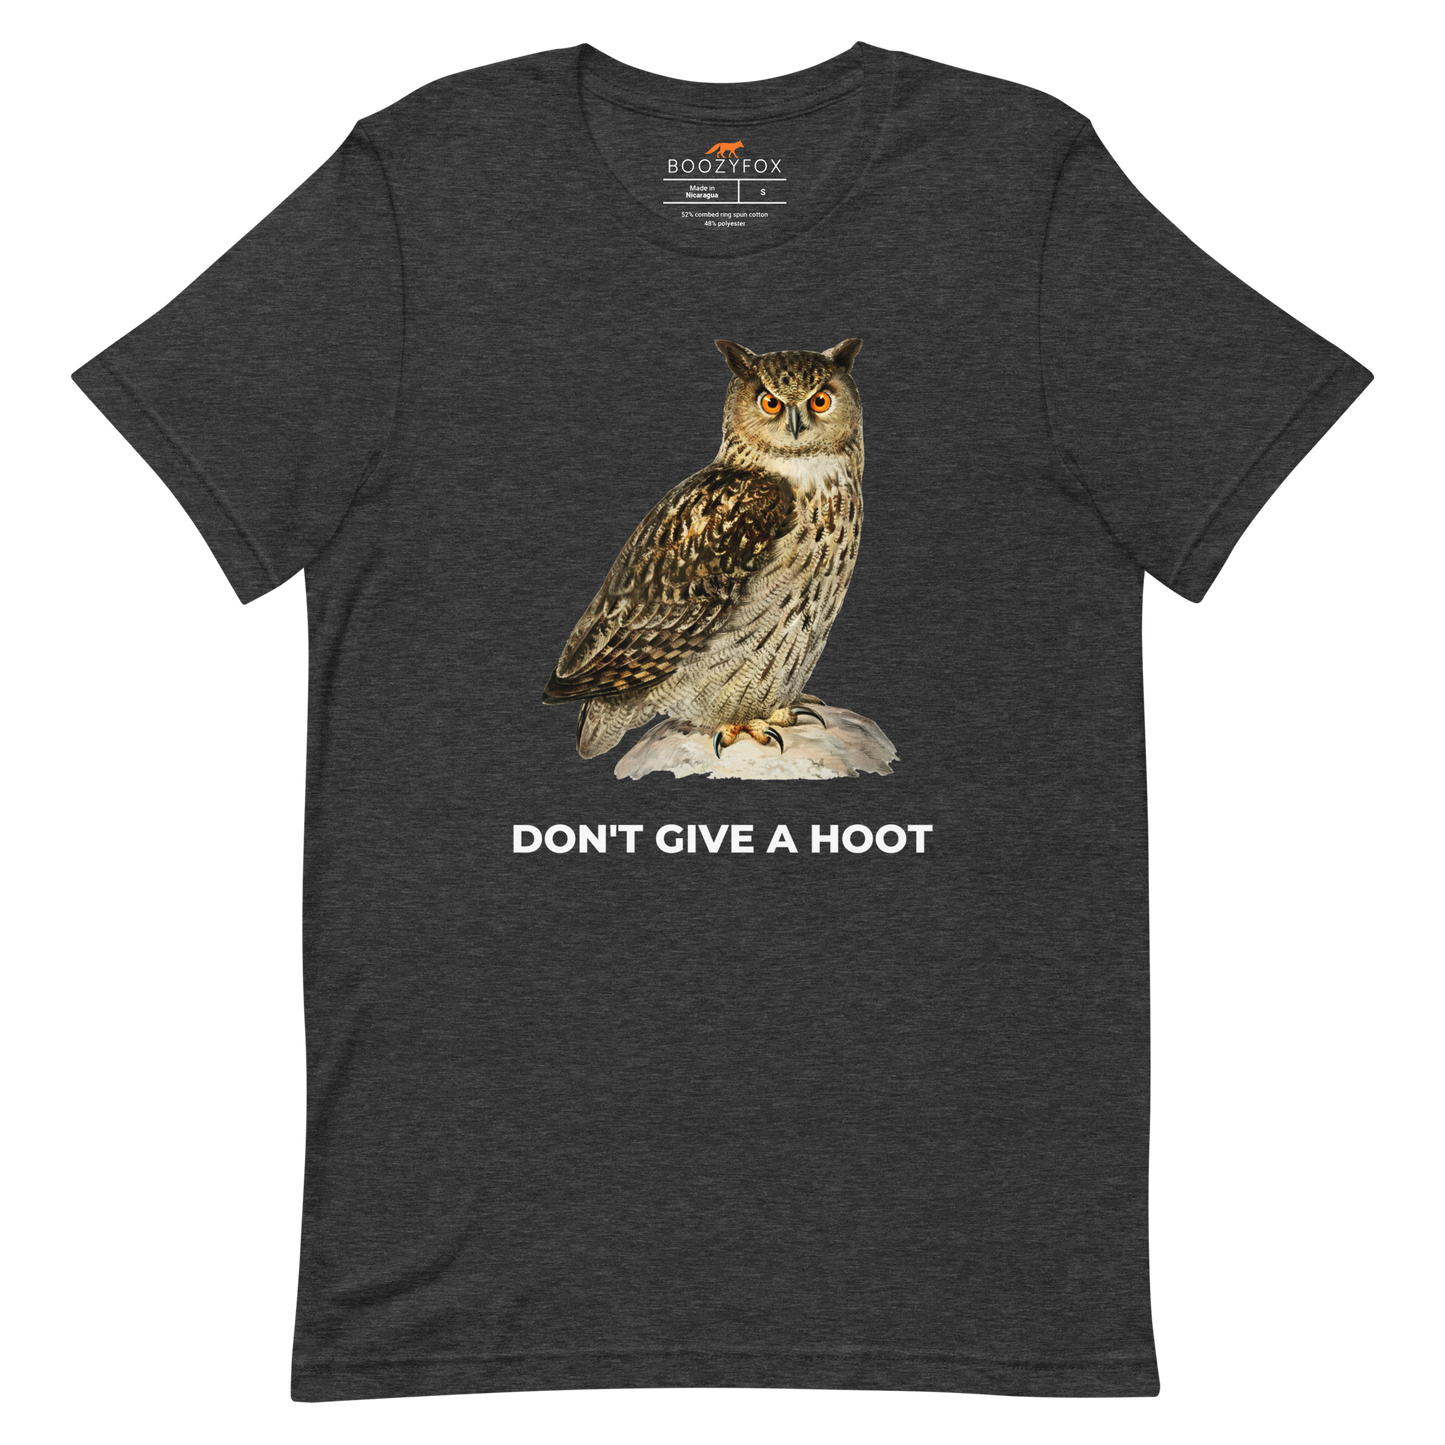 Dark Grey Heather Premium Owl T-Shirt featuring a captivating Don't Give A Hoot graphic on the chest - Funny Graphic Owl Tees - Boozy Fox